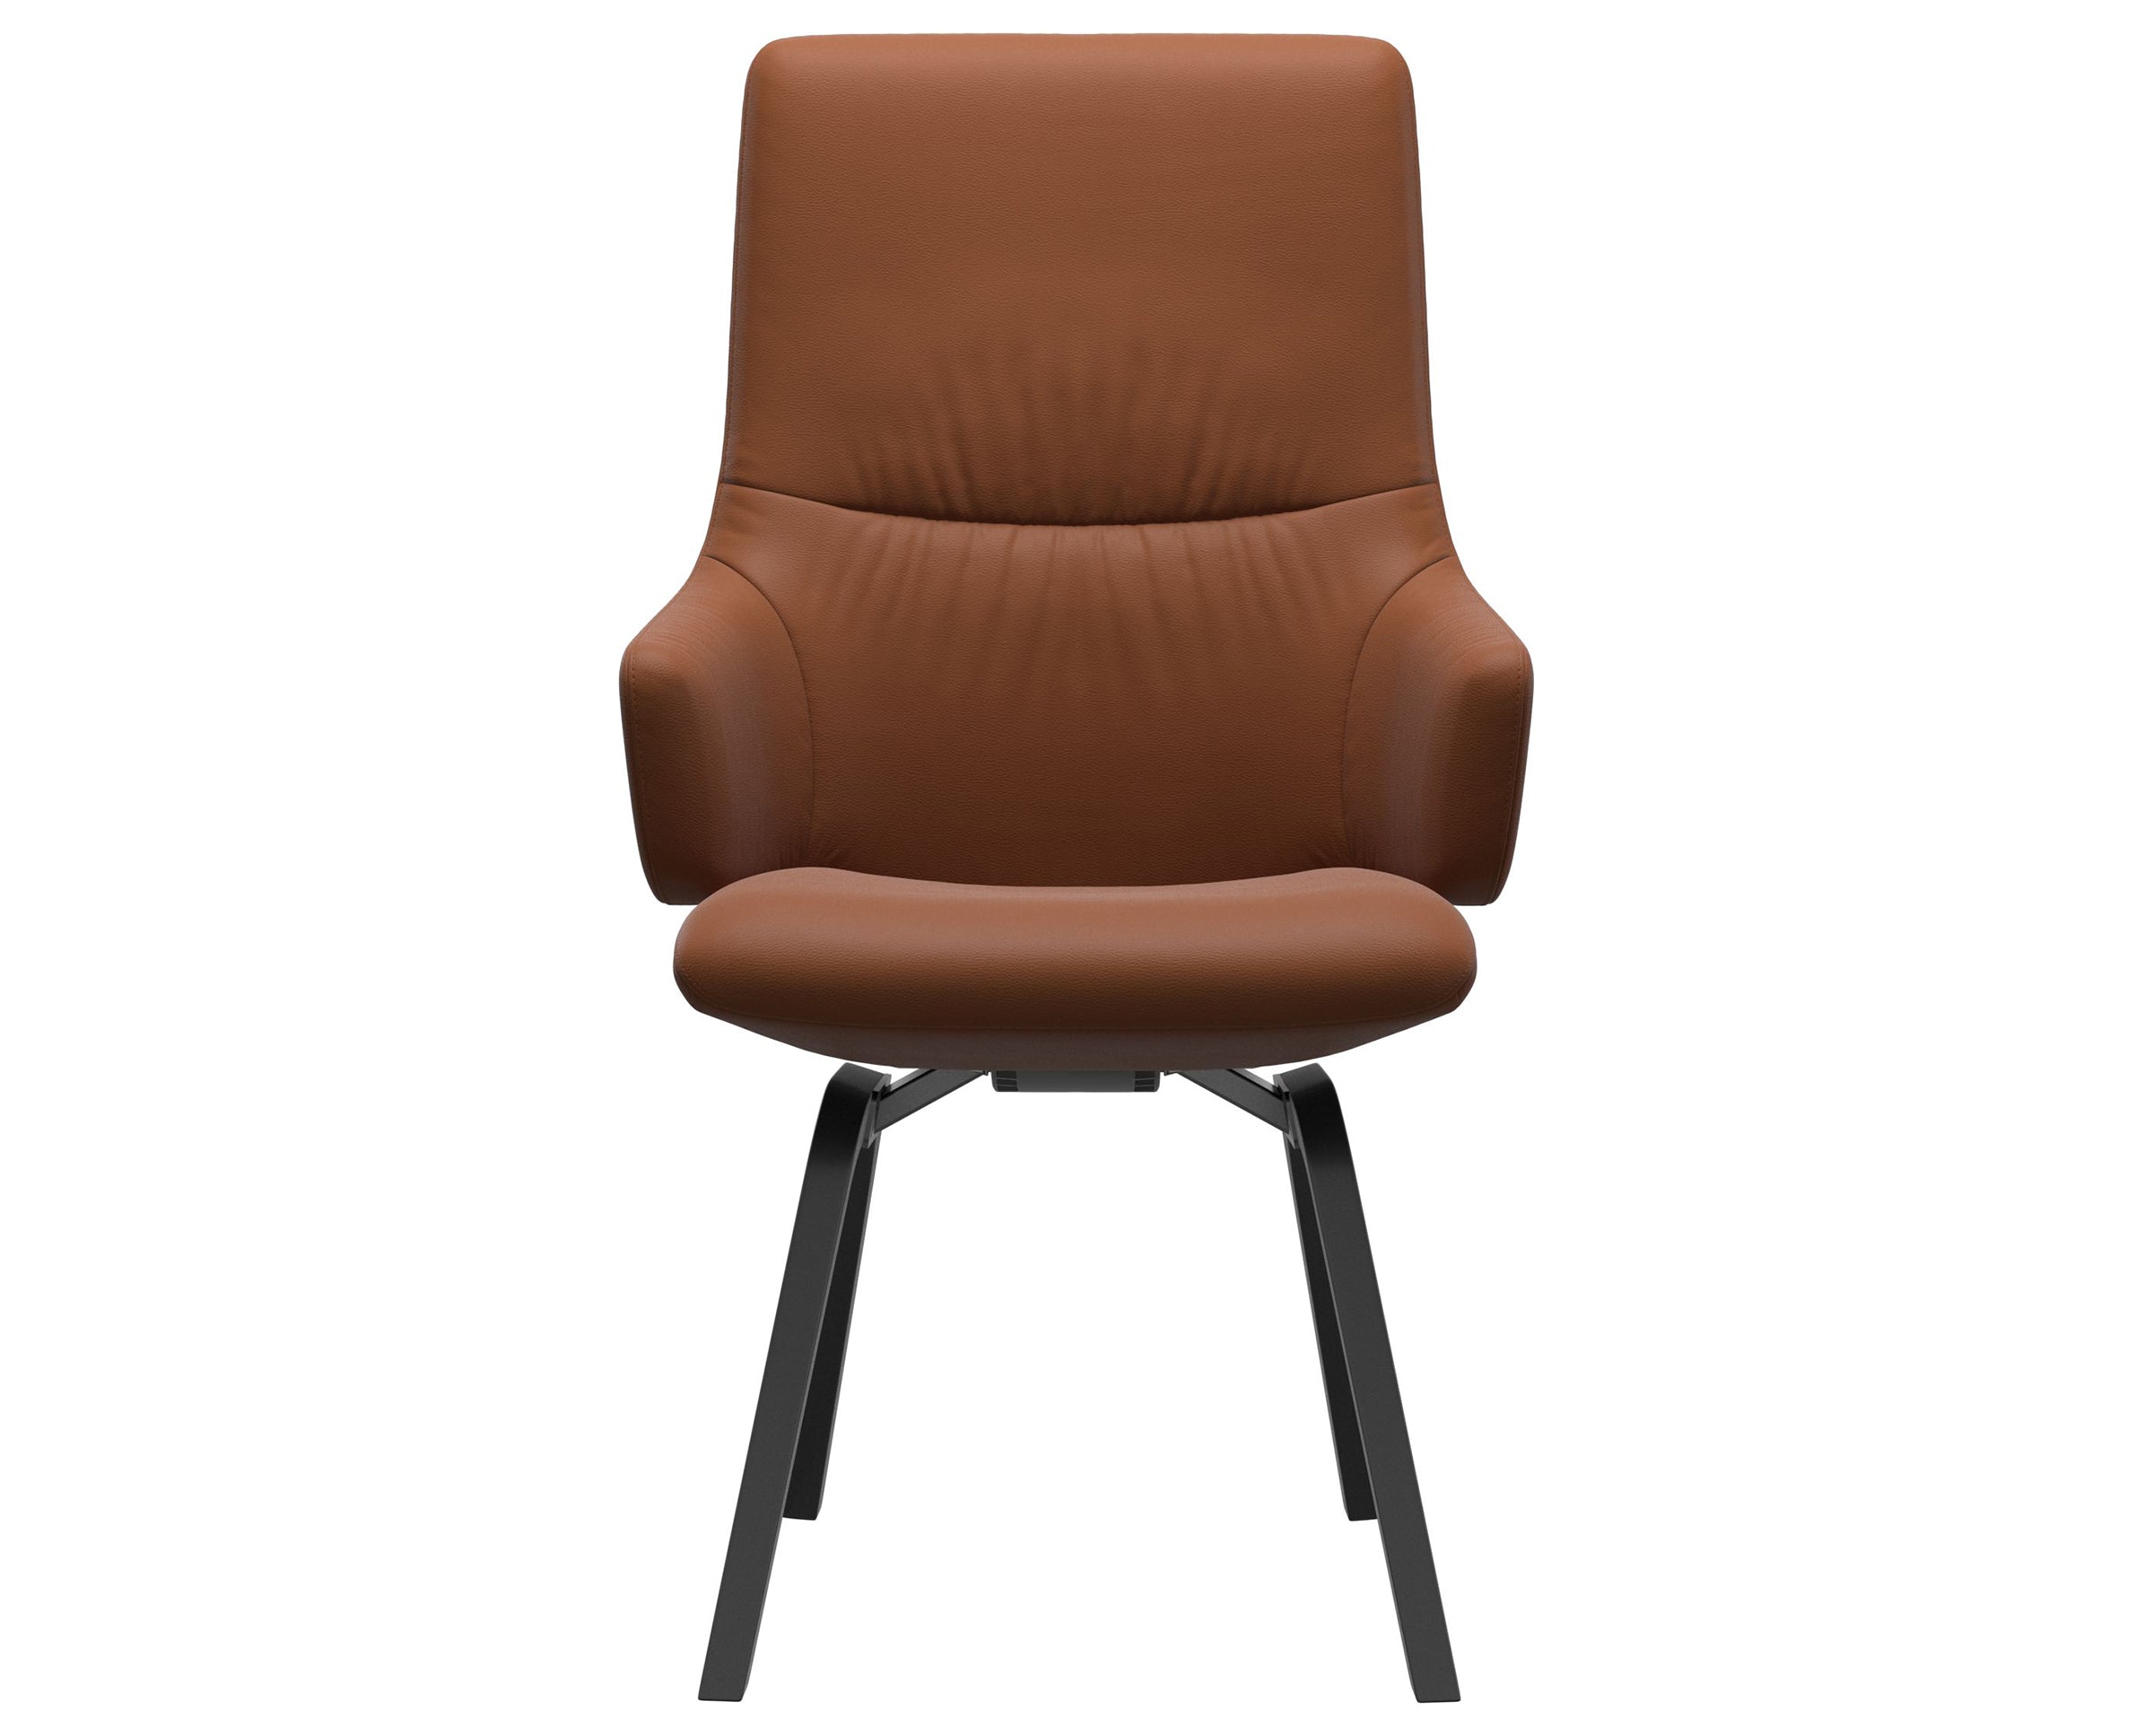 Paloma Leather New Cognac and Black Base | Stressless Mint High Back D200 Dining Chair w/Arms | Valley Ridge Furniture